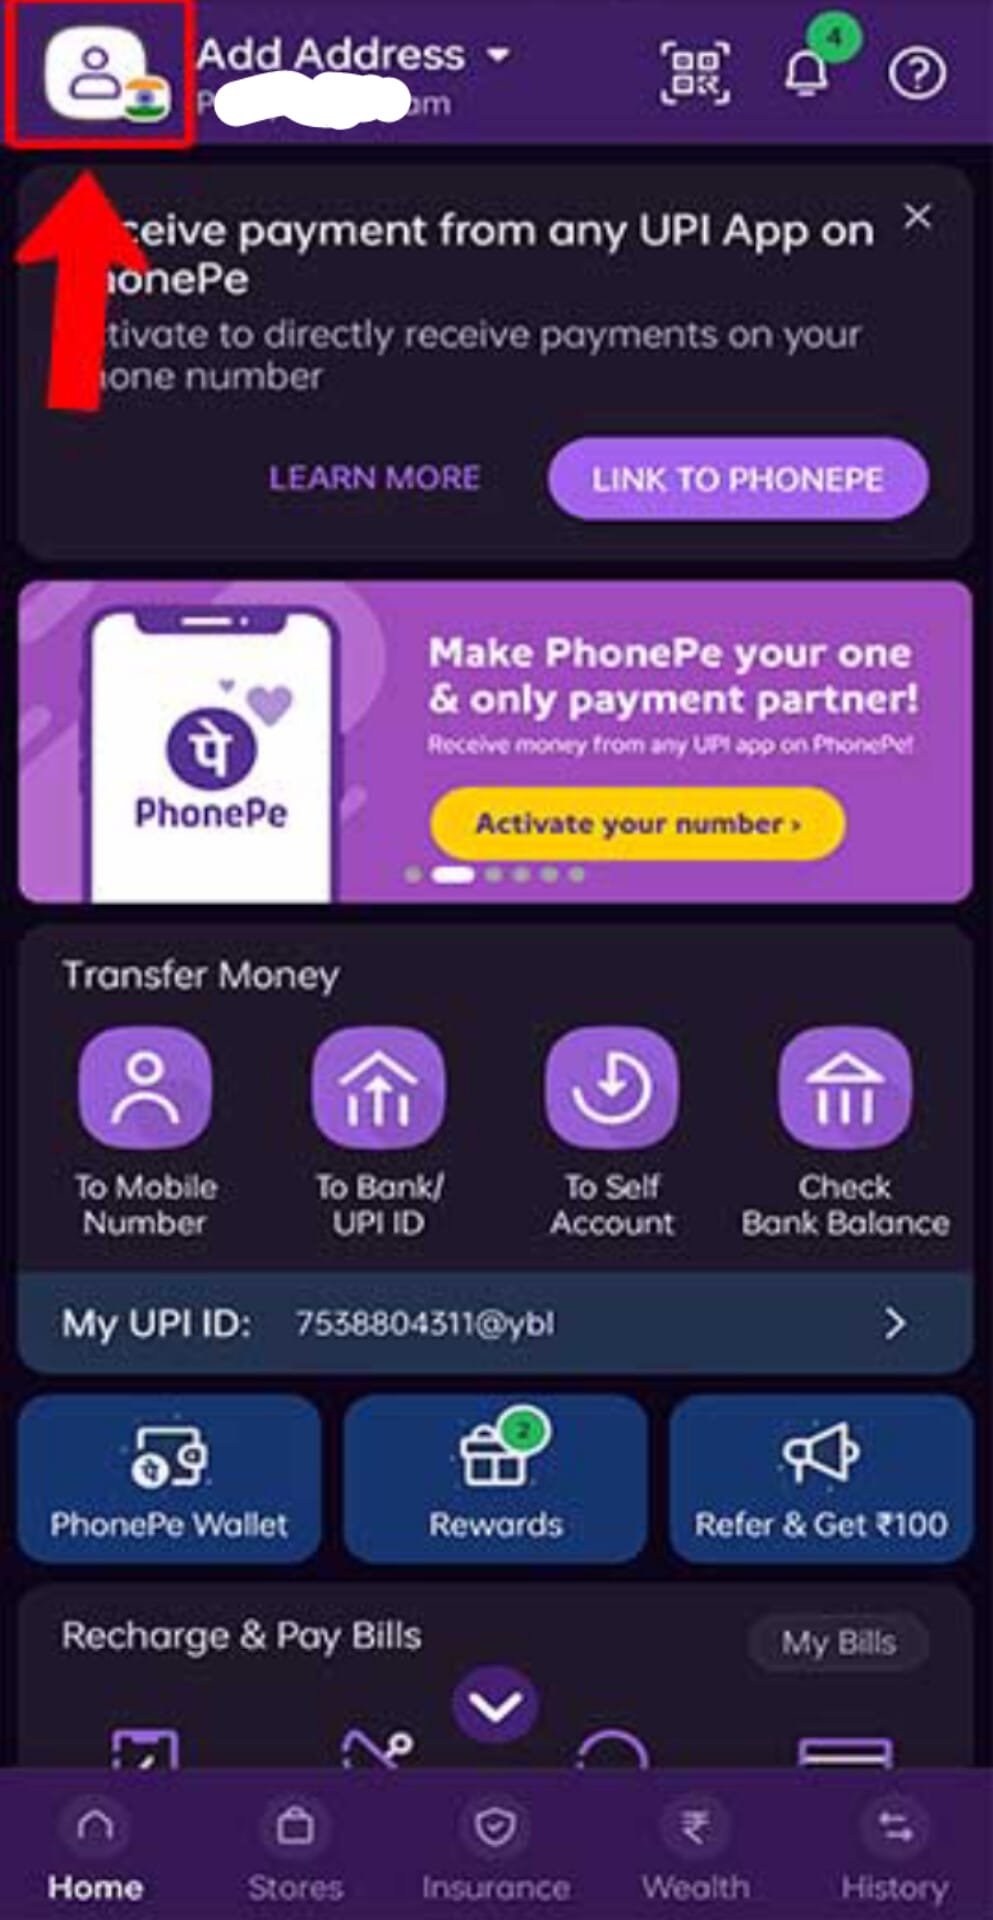 Change your primary account on PhonePe: Step 1